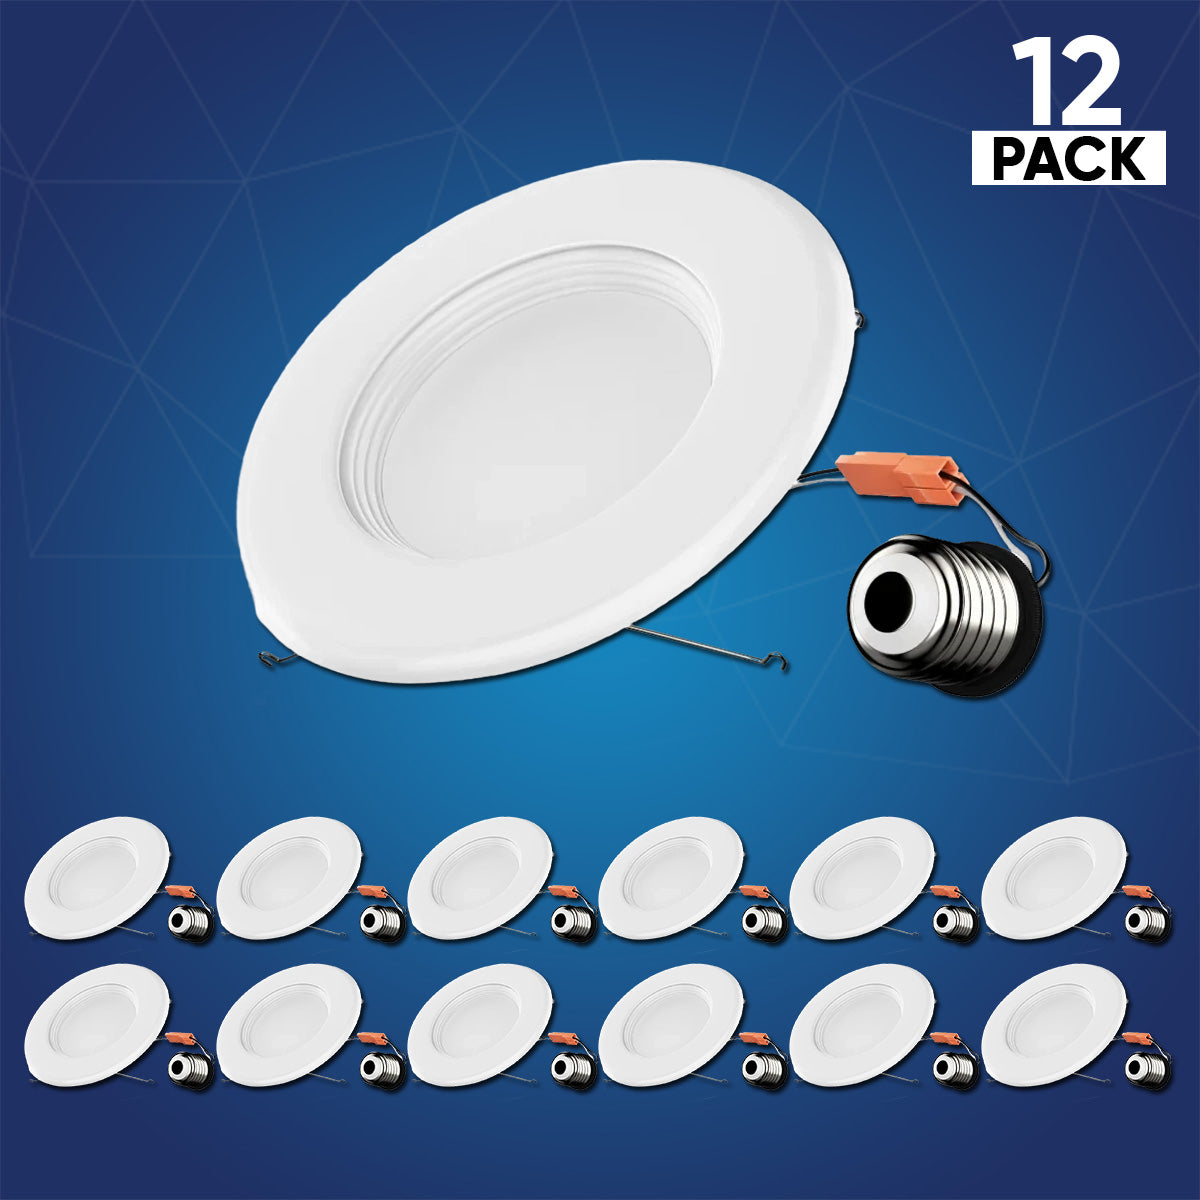 5 in. and 6 in. Recessed LED Downlight, 15W, 1100LM, Baffle-trim, Dimmable, Energy Star & ETL, Easy Retrofit Installation, LED Can Lights